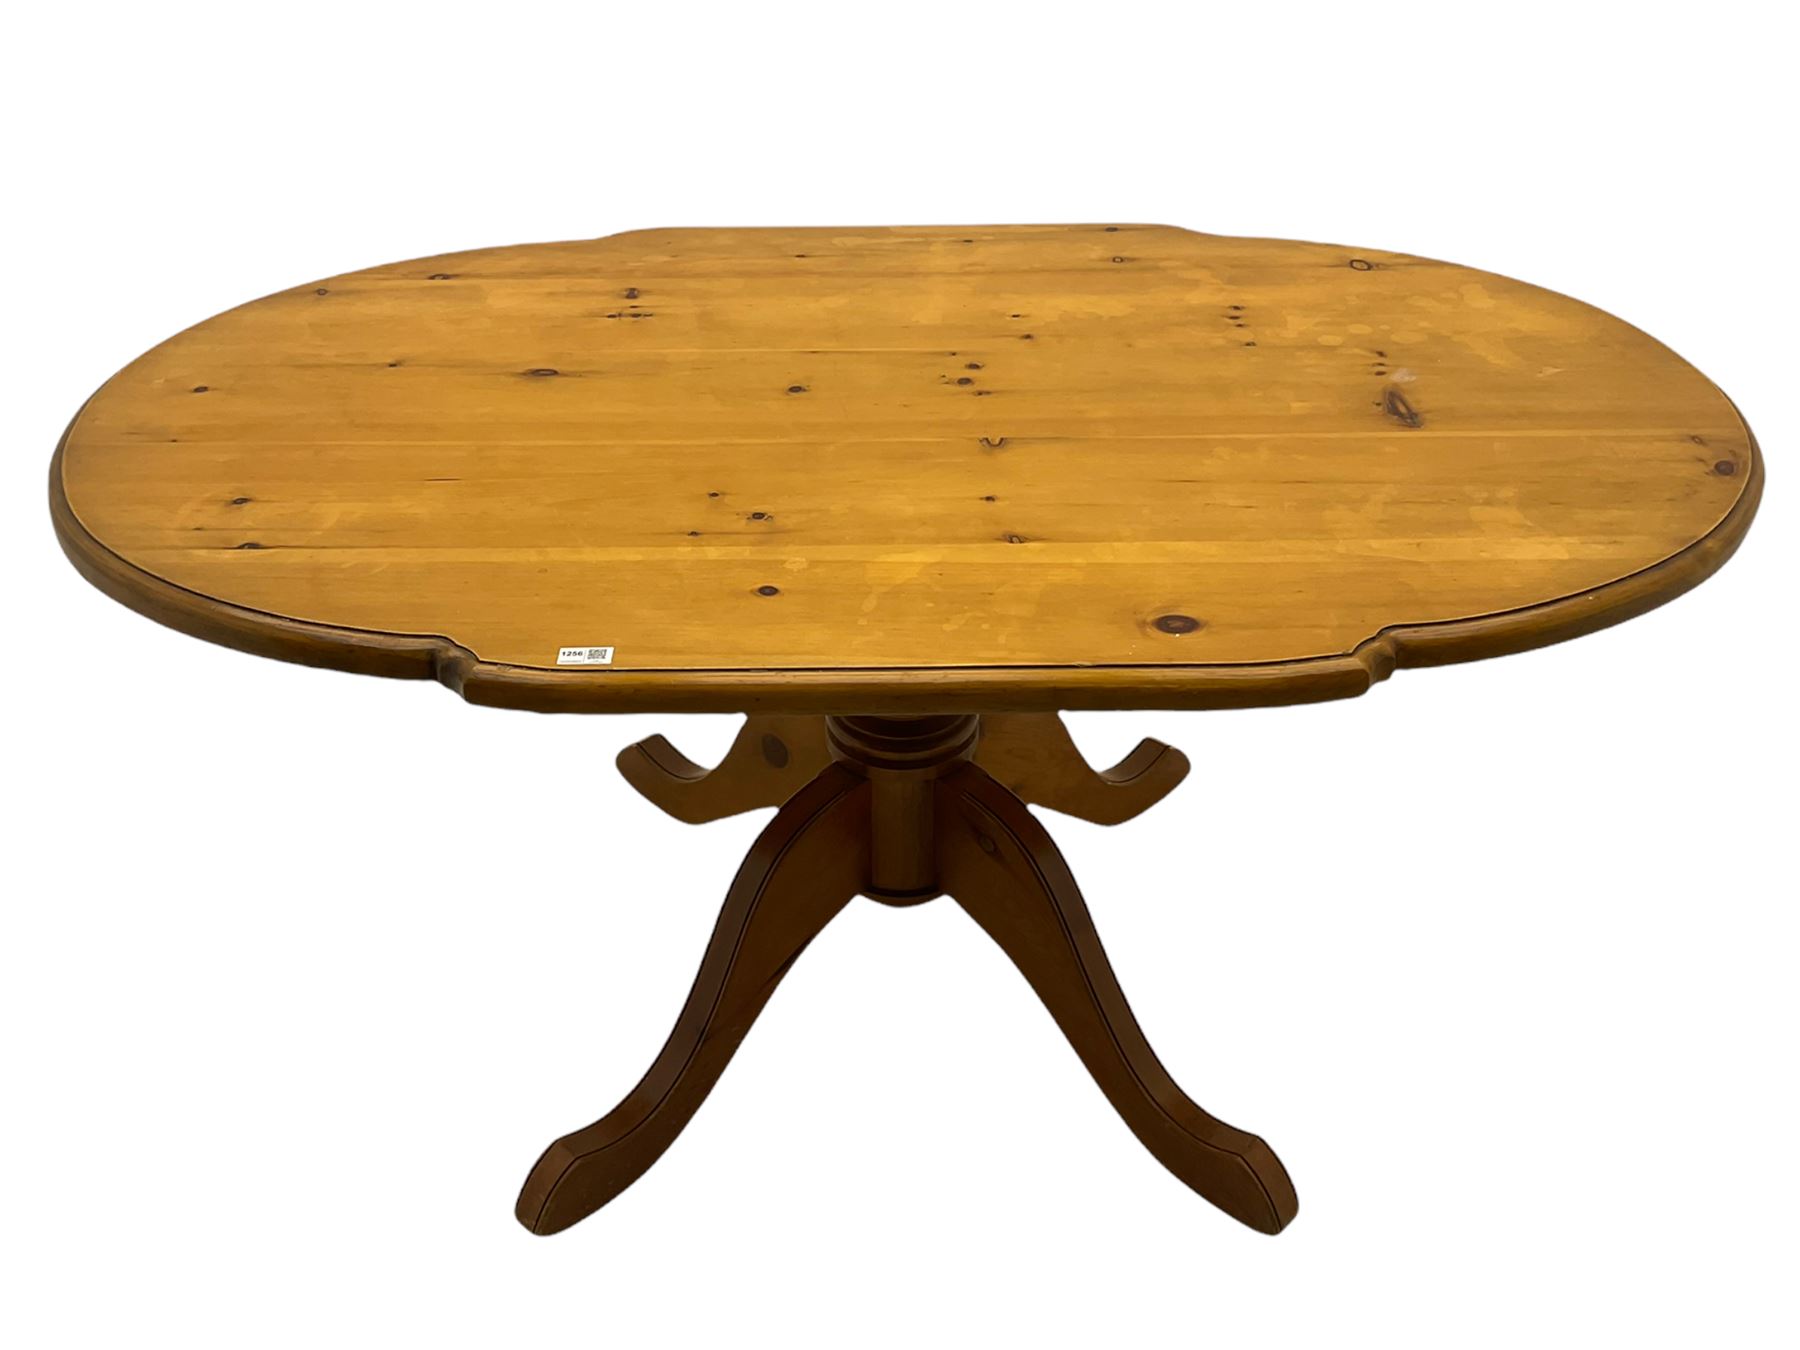 Solid pine oval pedestal dining table - Image 3 of 15